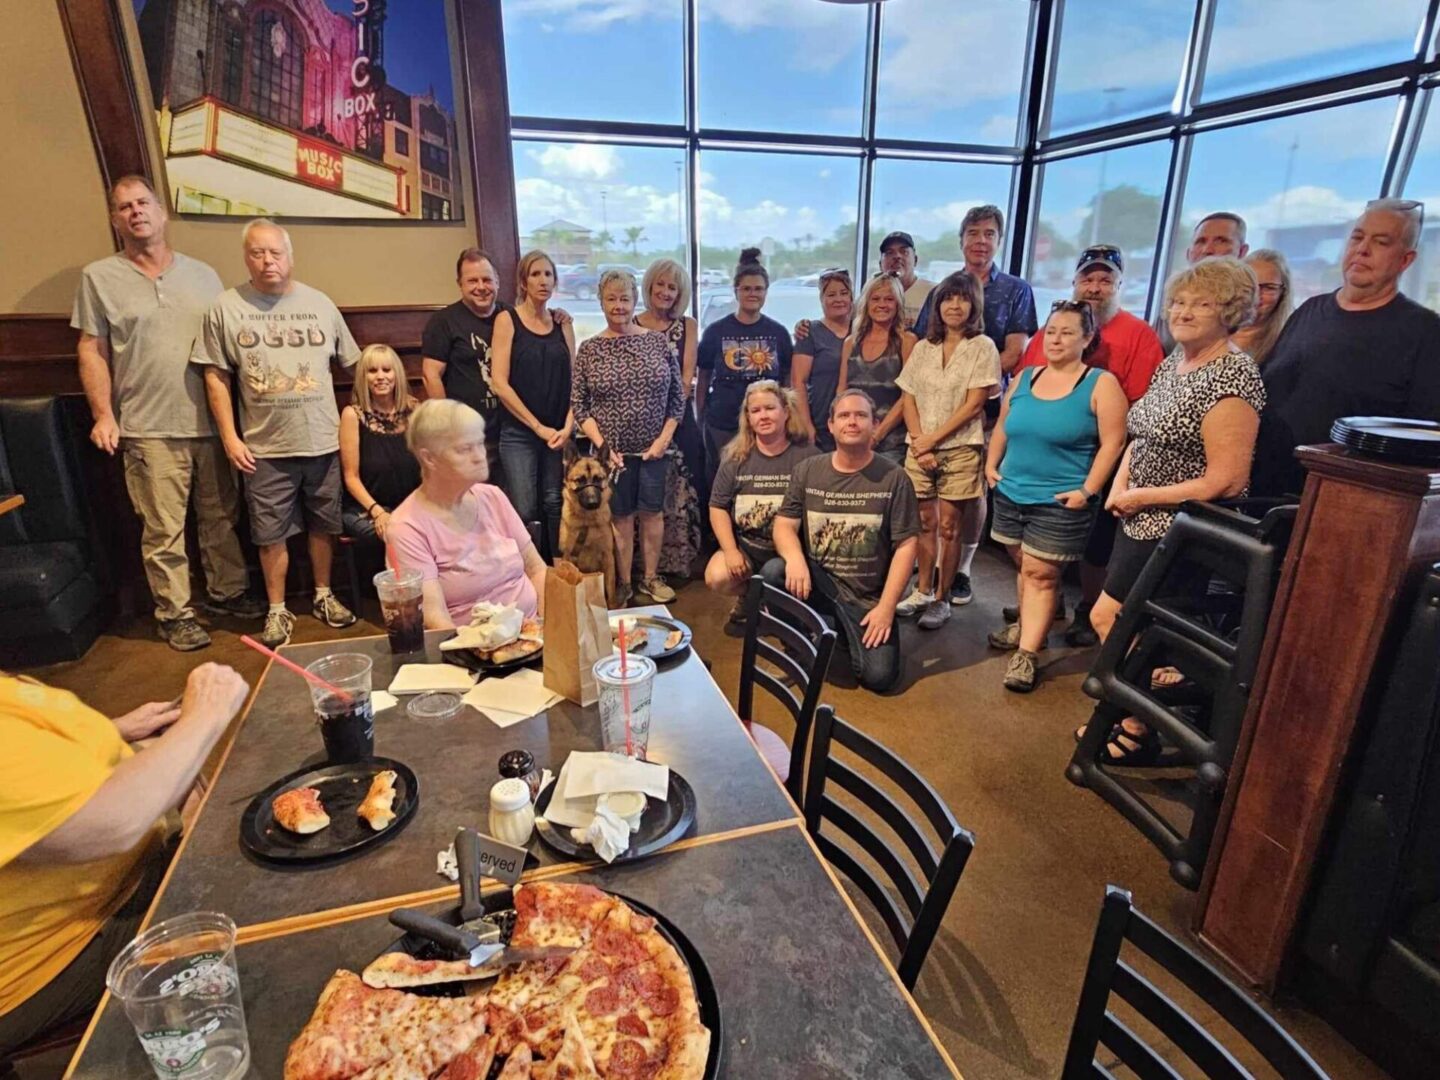 A group of people standing around a table with pizza.